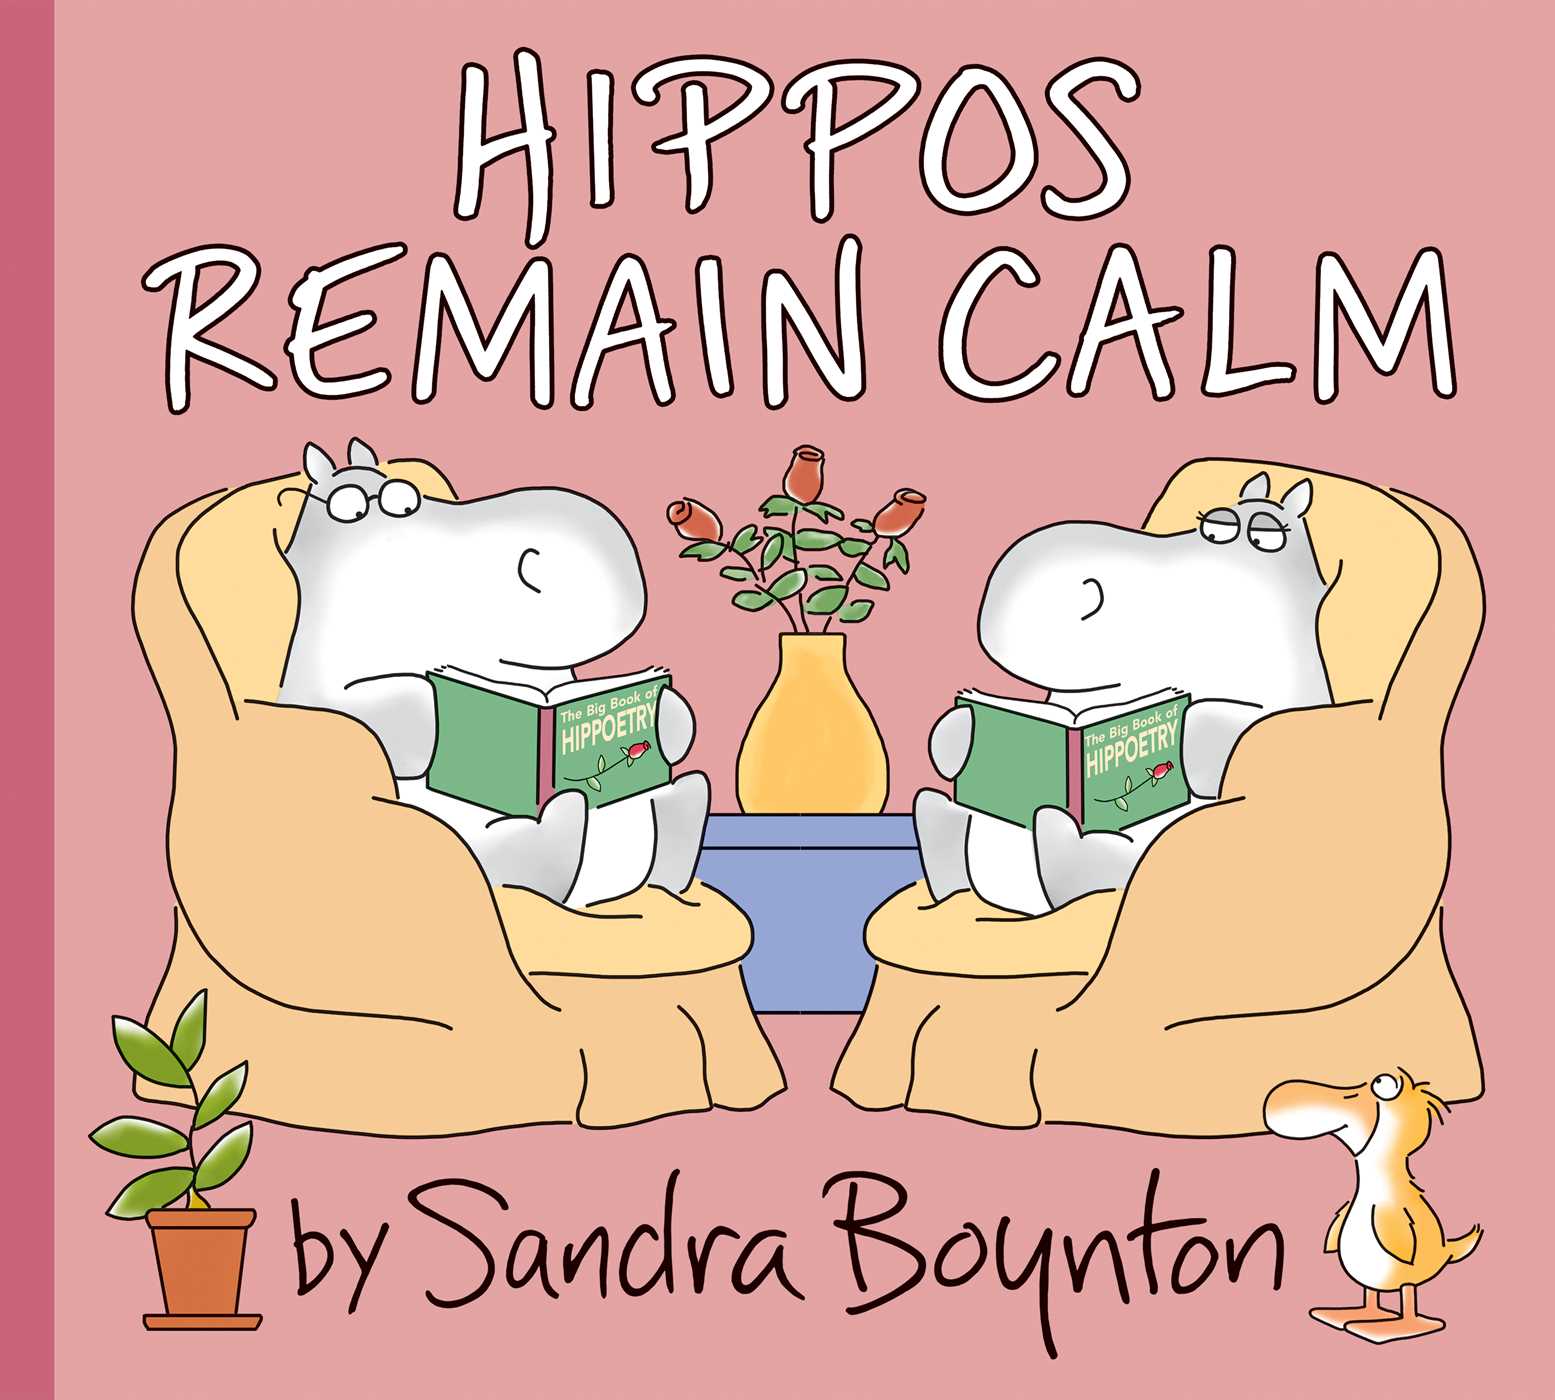 Image for "Hippos Remain Calm"